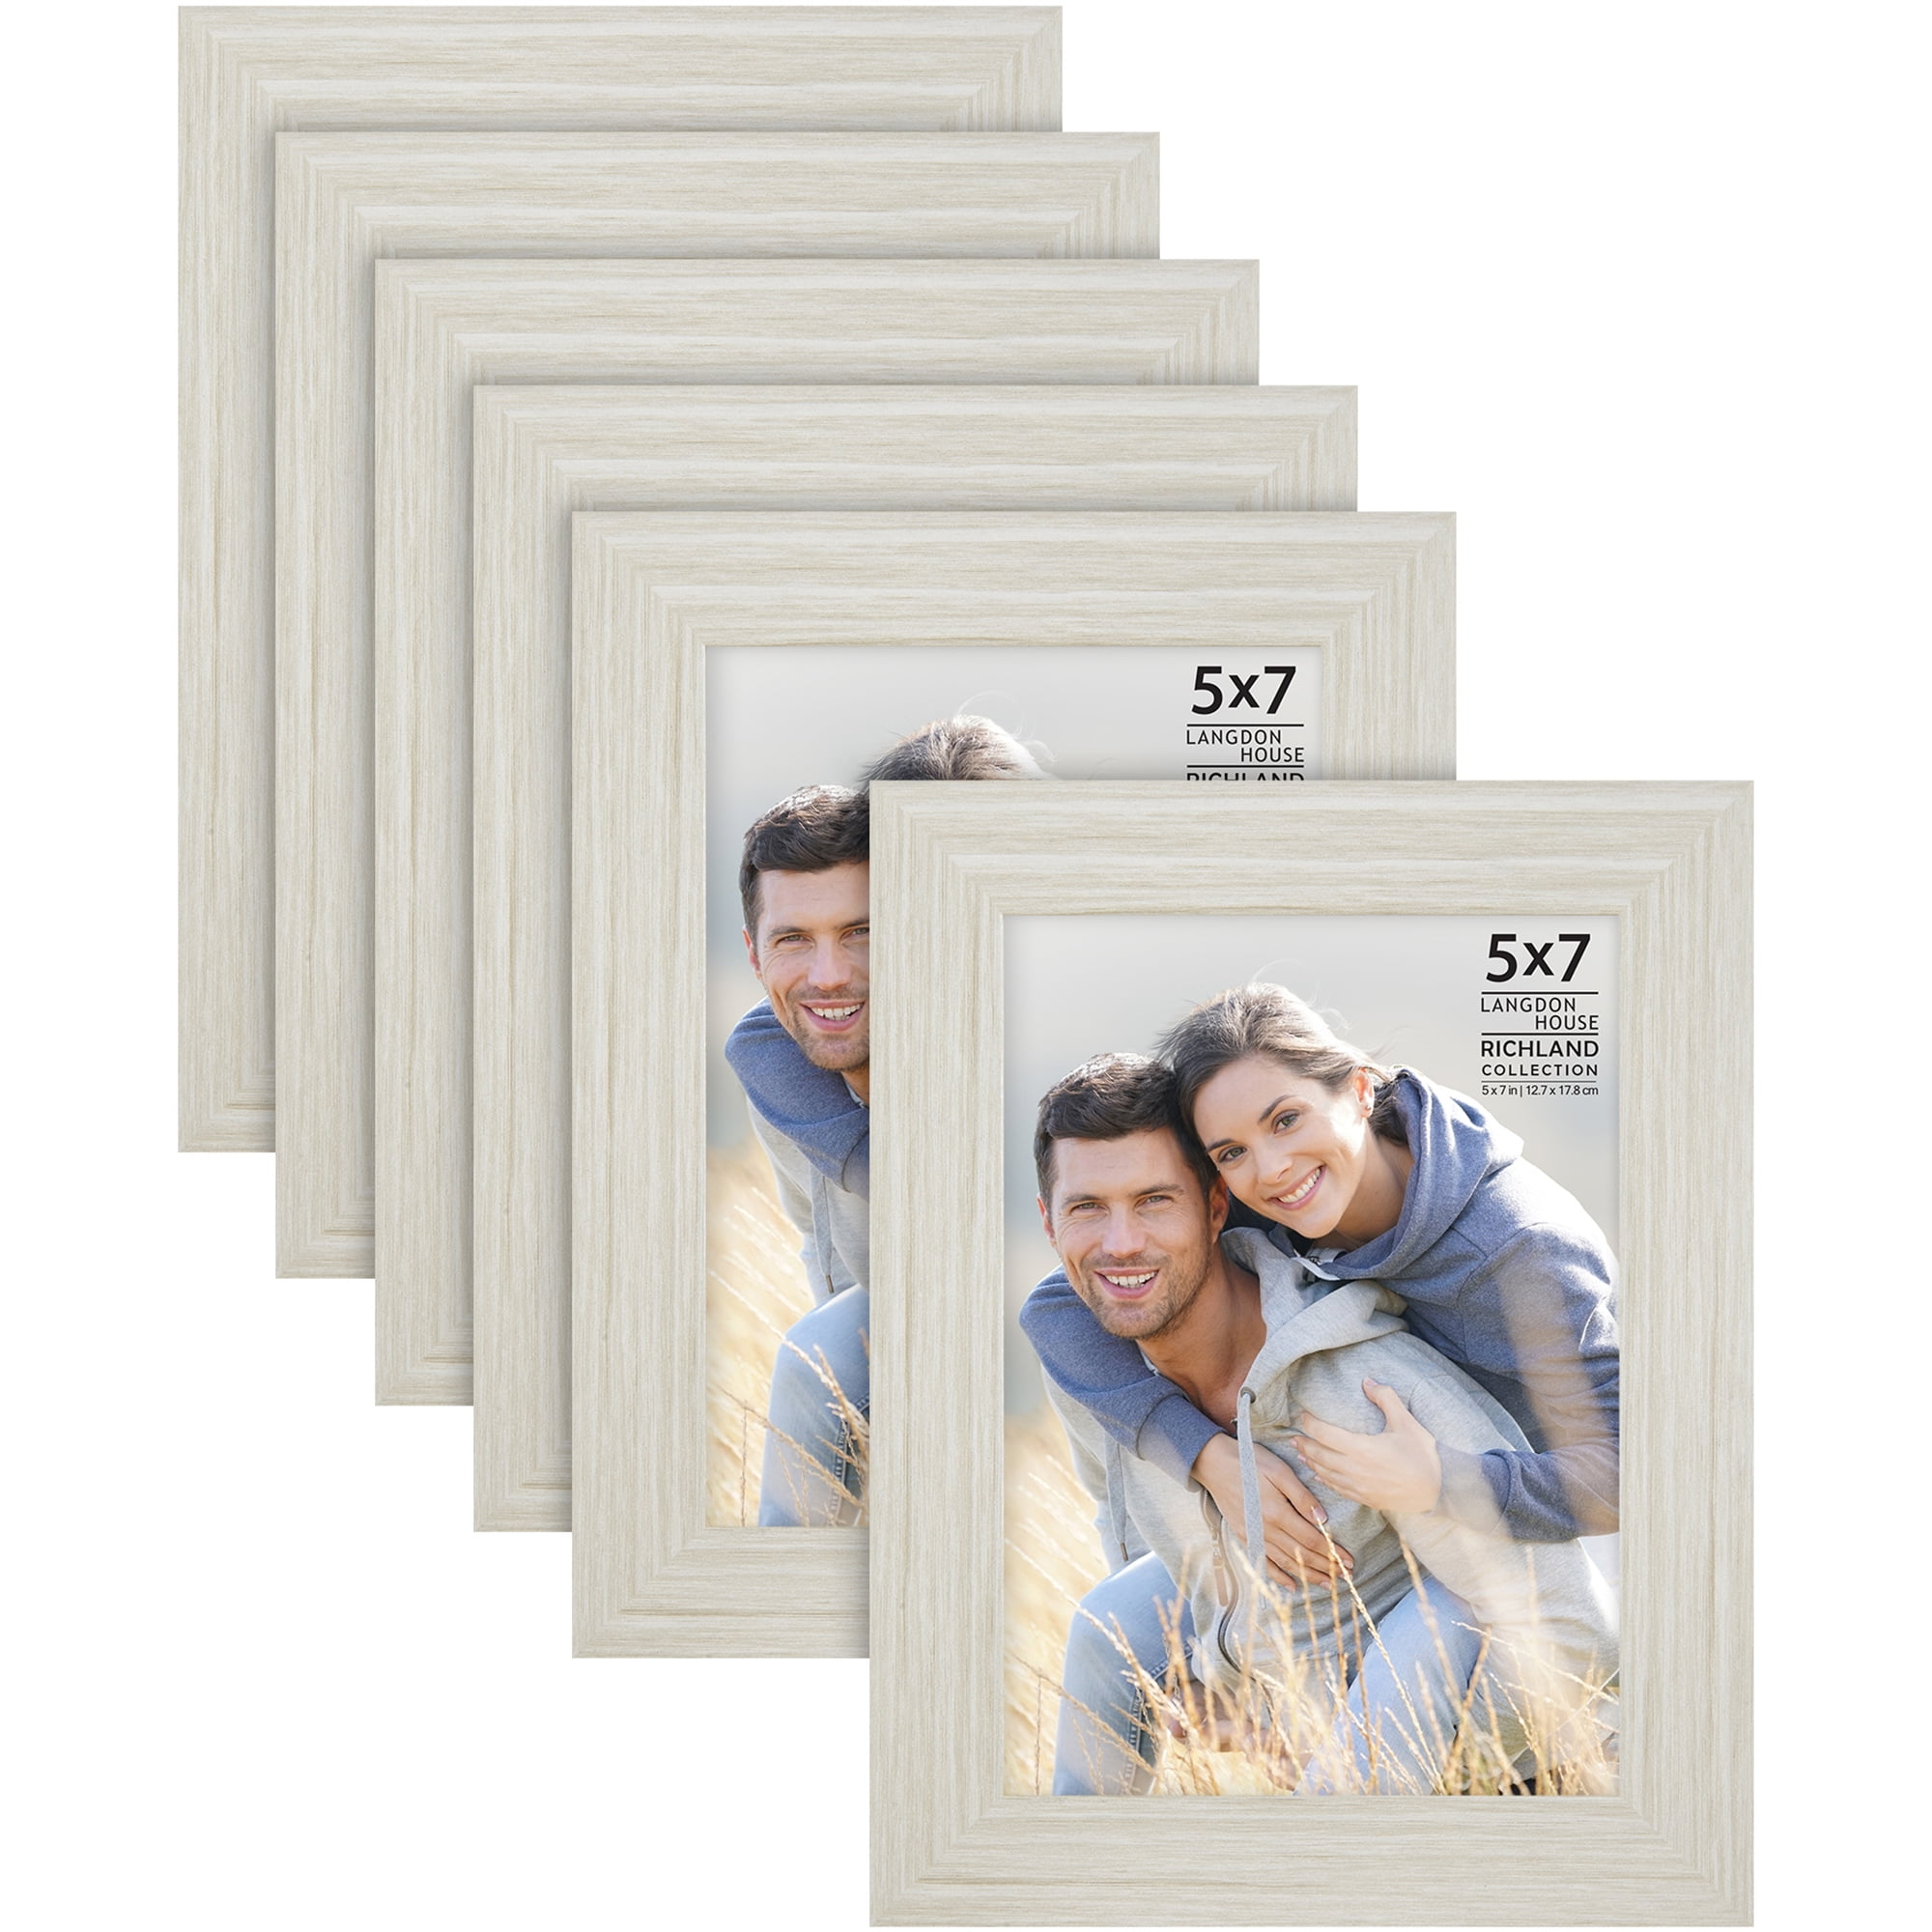  Langdon House Picture Frame Glass Replacements (Crystal Clear,  5x7, 3 Pack) High-Definition Glass Sheet : Arts, Crafts & Sewing